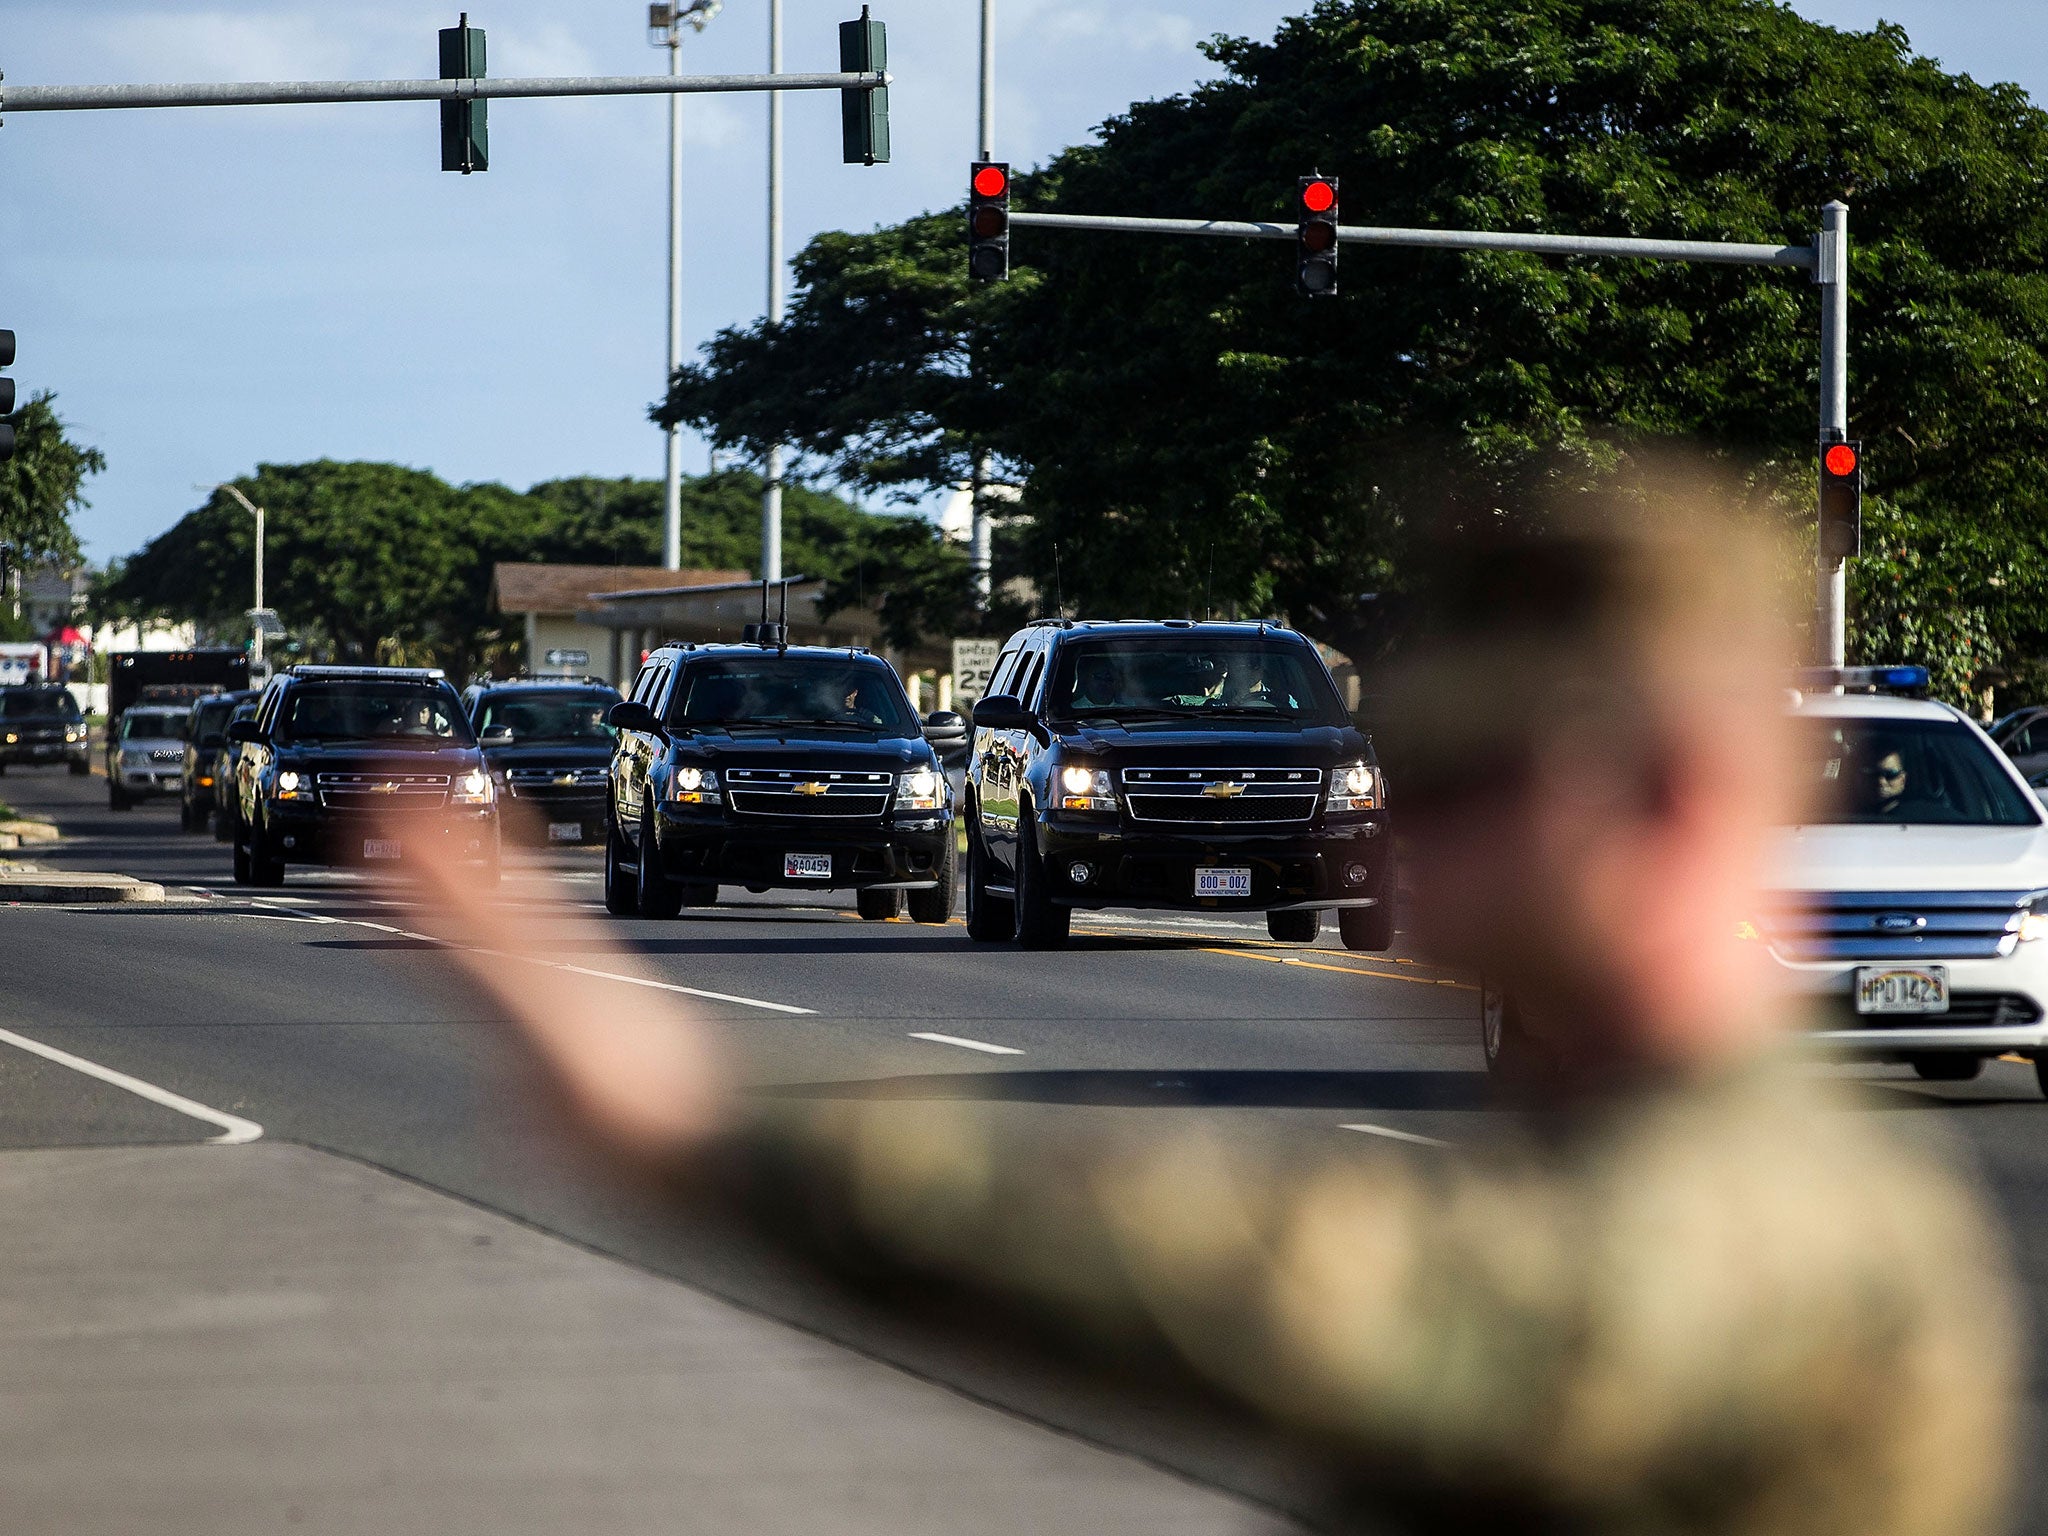 Roads are routinely closed for President Obama's motorcade to pass through